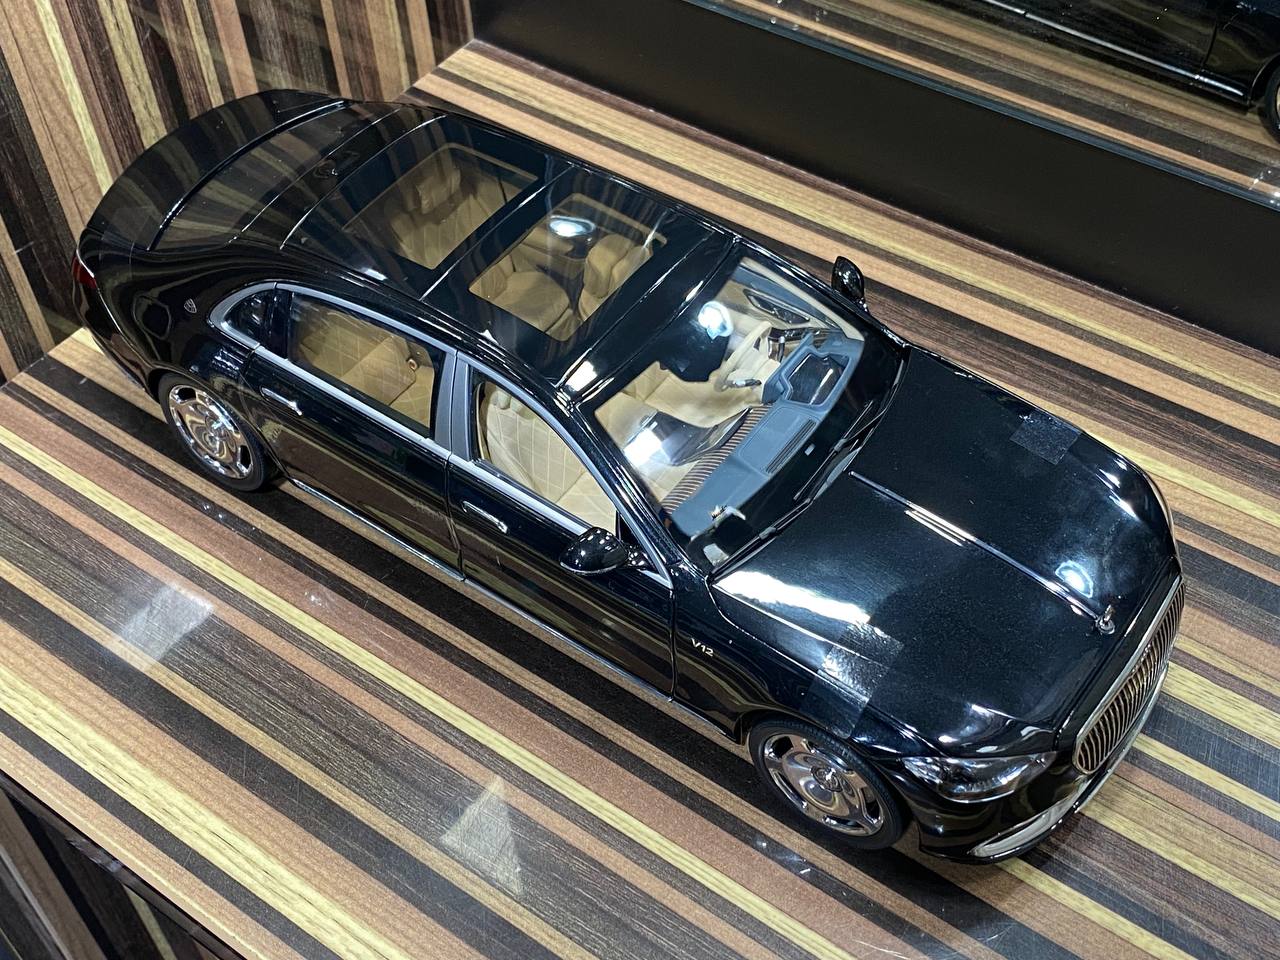 Mercedes-Benz S-Class Maybach S 680 Almost Real